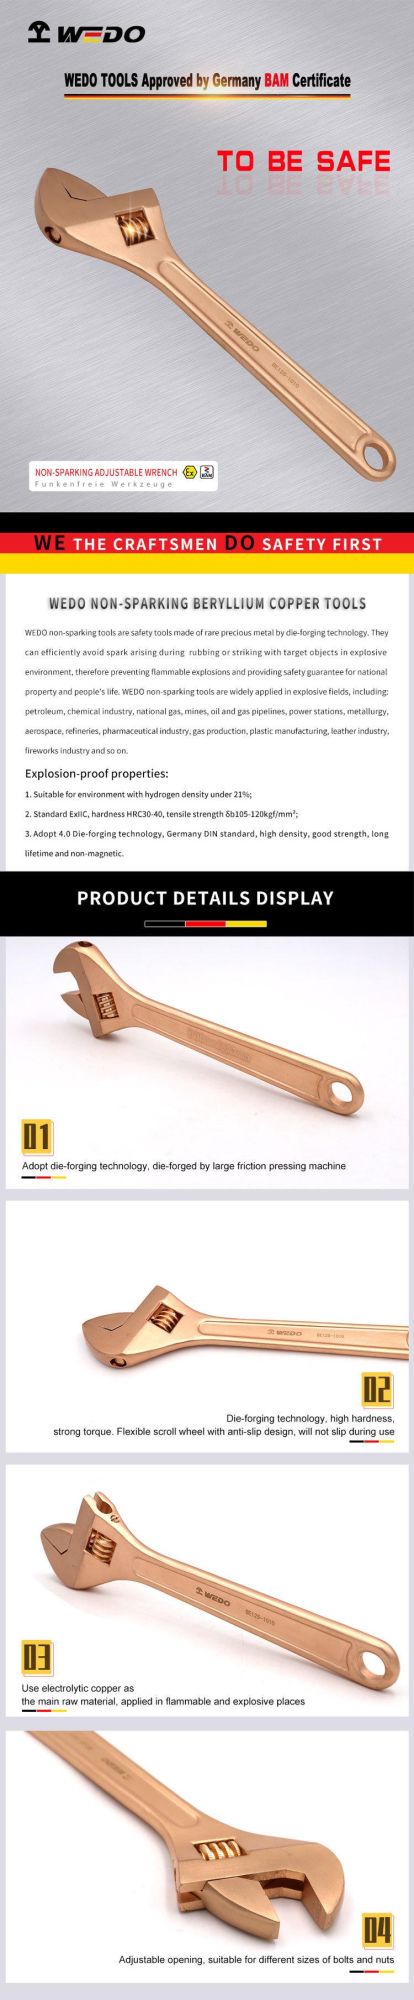 WEDO Hot Sale Wrench 24" Non-Magnetic/Sparking Adjustable Spanner Beryllium Copper